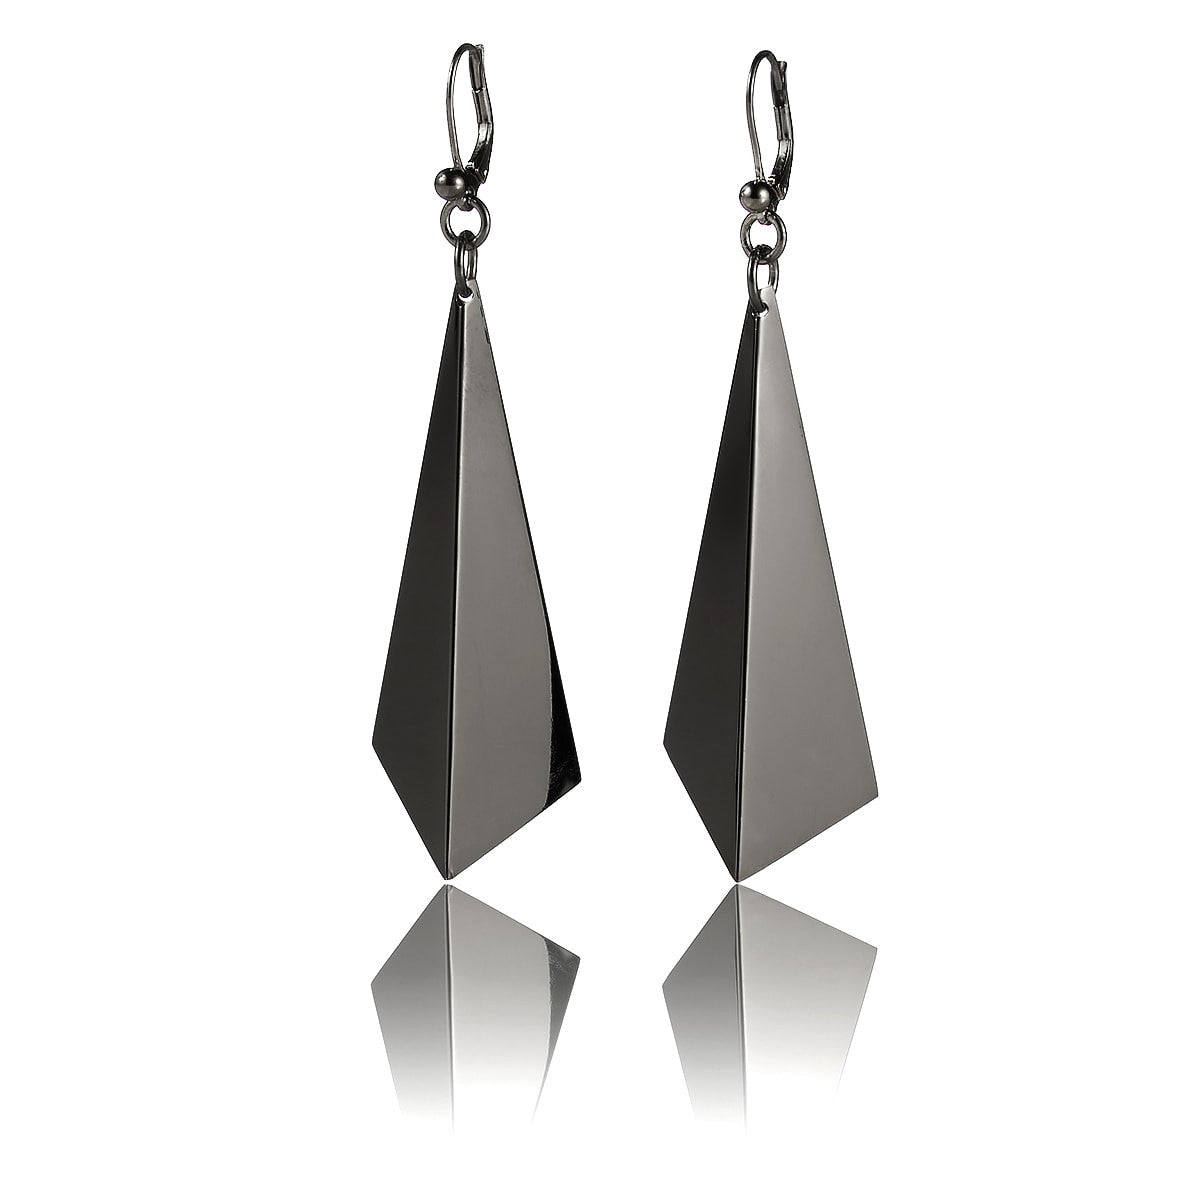 Striking geometric earrings in shiny black plating from iconic Facet collection   Material: Rhodium-plated silver.